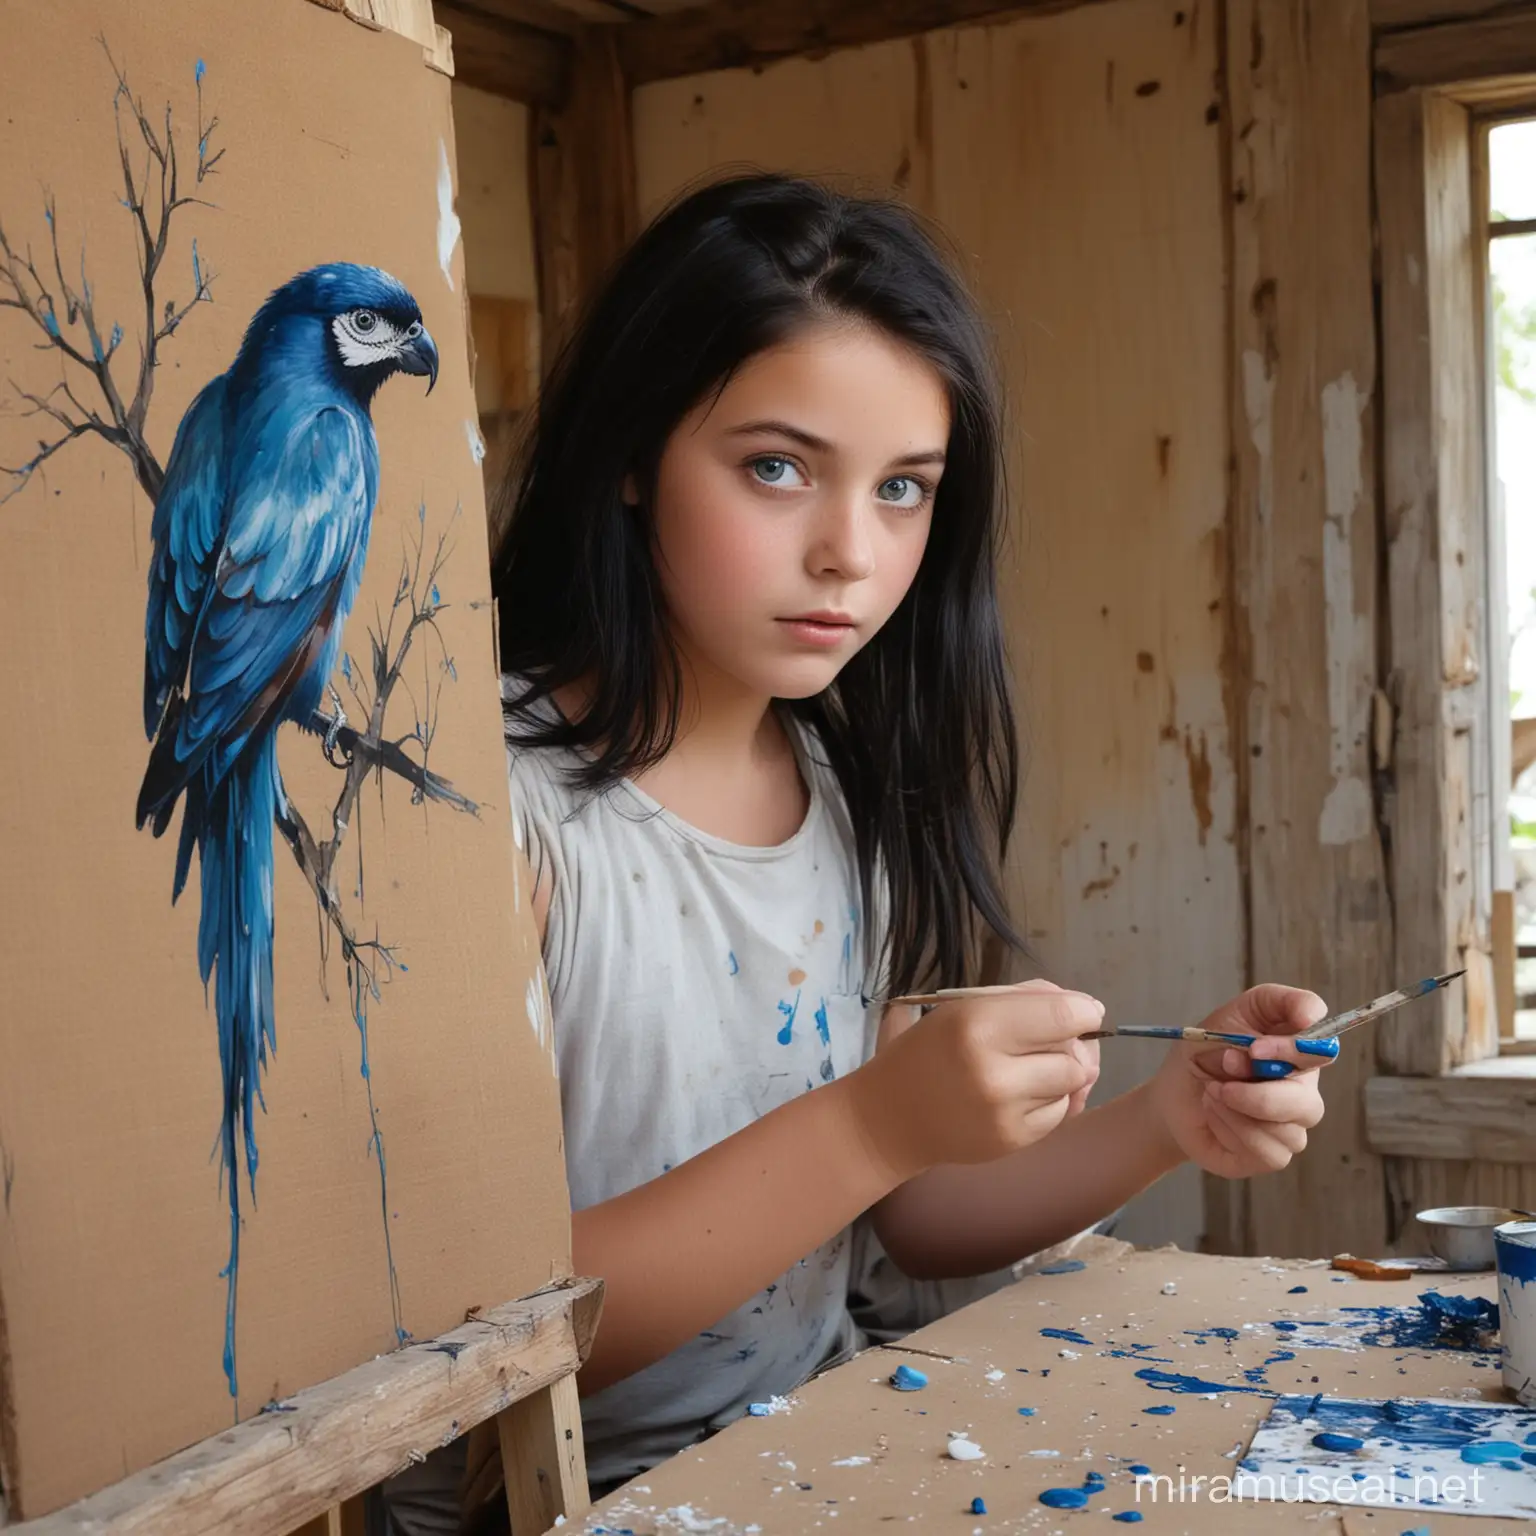 Now, remember the girl, you have just created with black hair and blue eyes, is in the shack. She is painting a bird. And Bird is going to be alive.